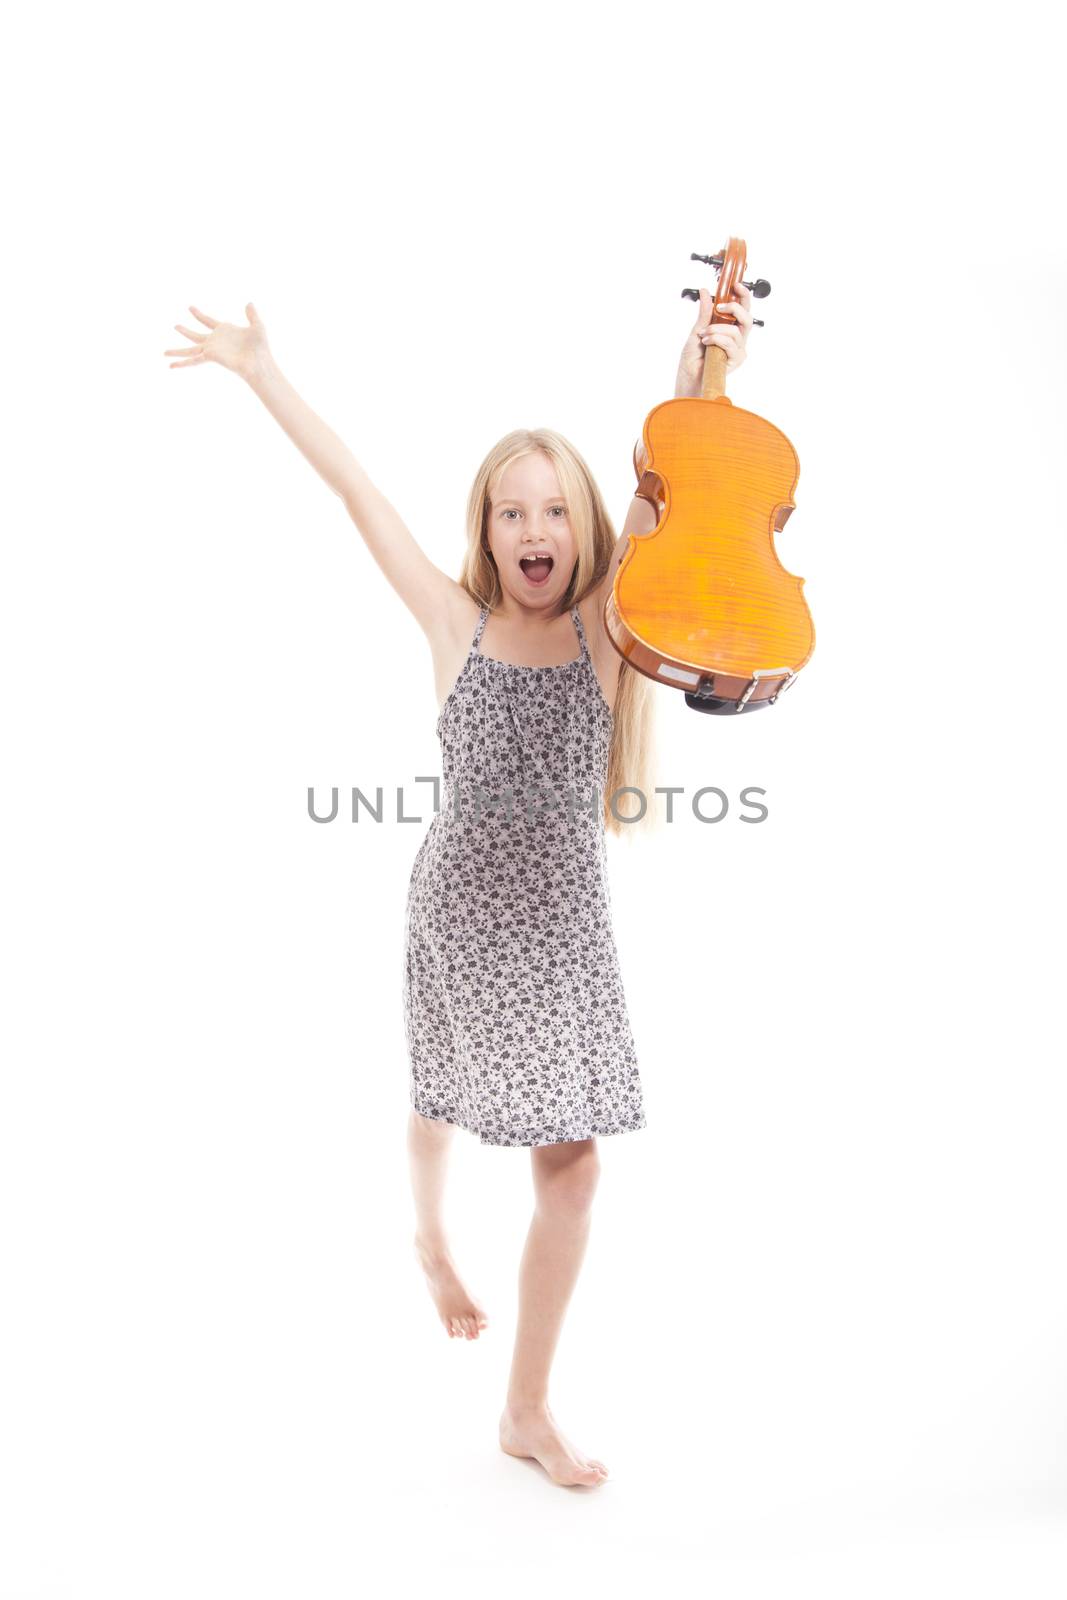 young girl in dress happy with violin by ahavelaar